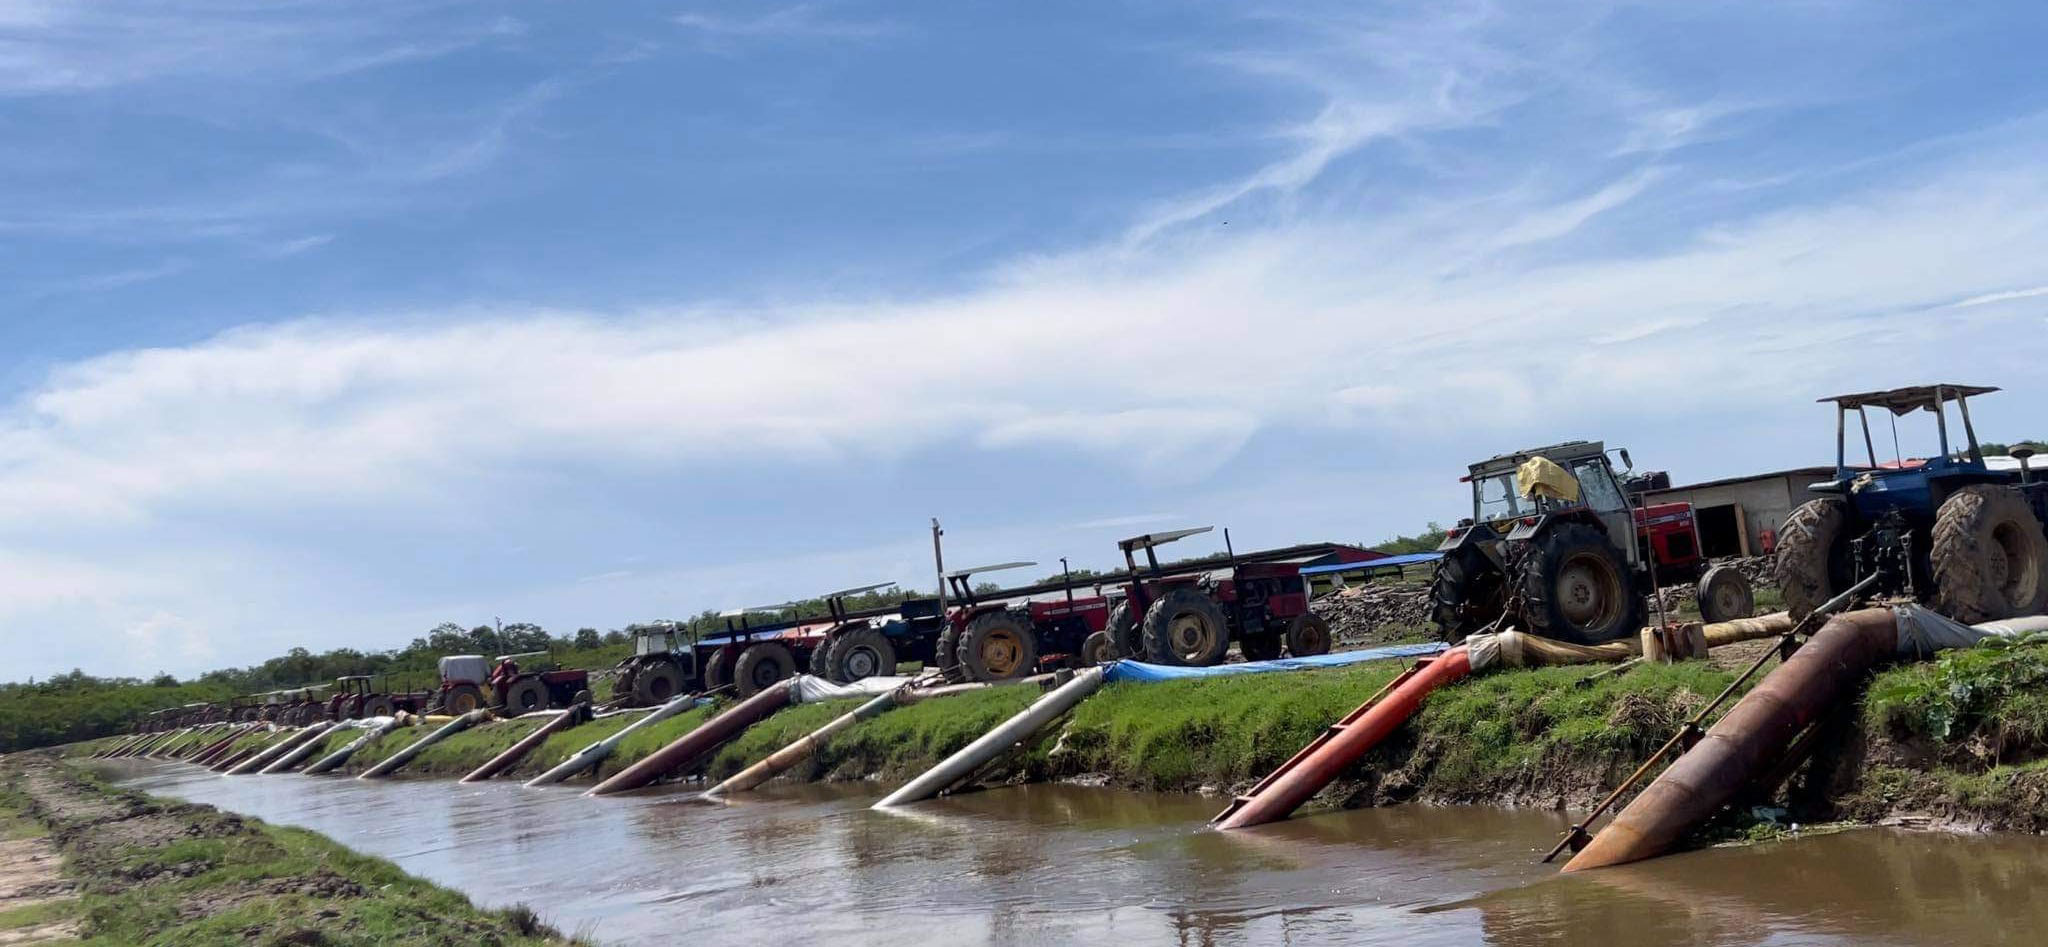 Some of the tractors during their deployment to pump water from flooded areas 